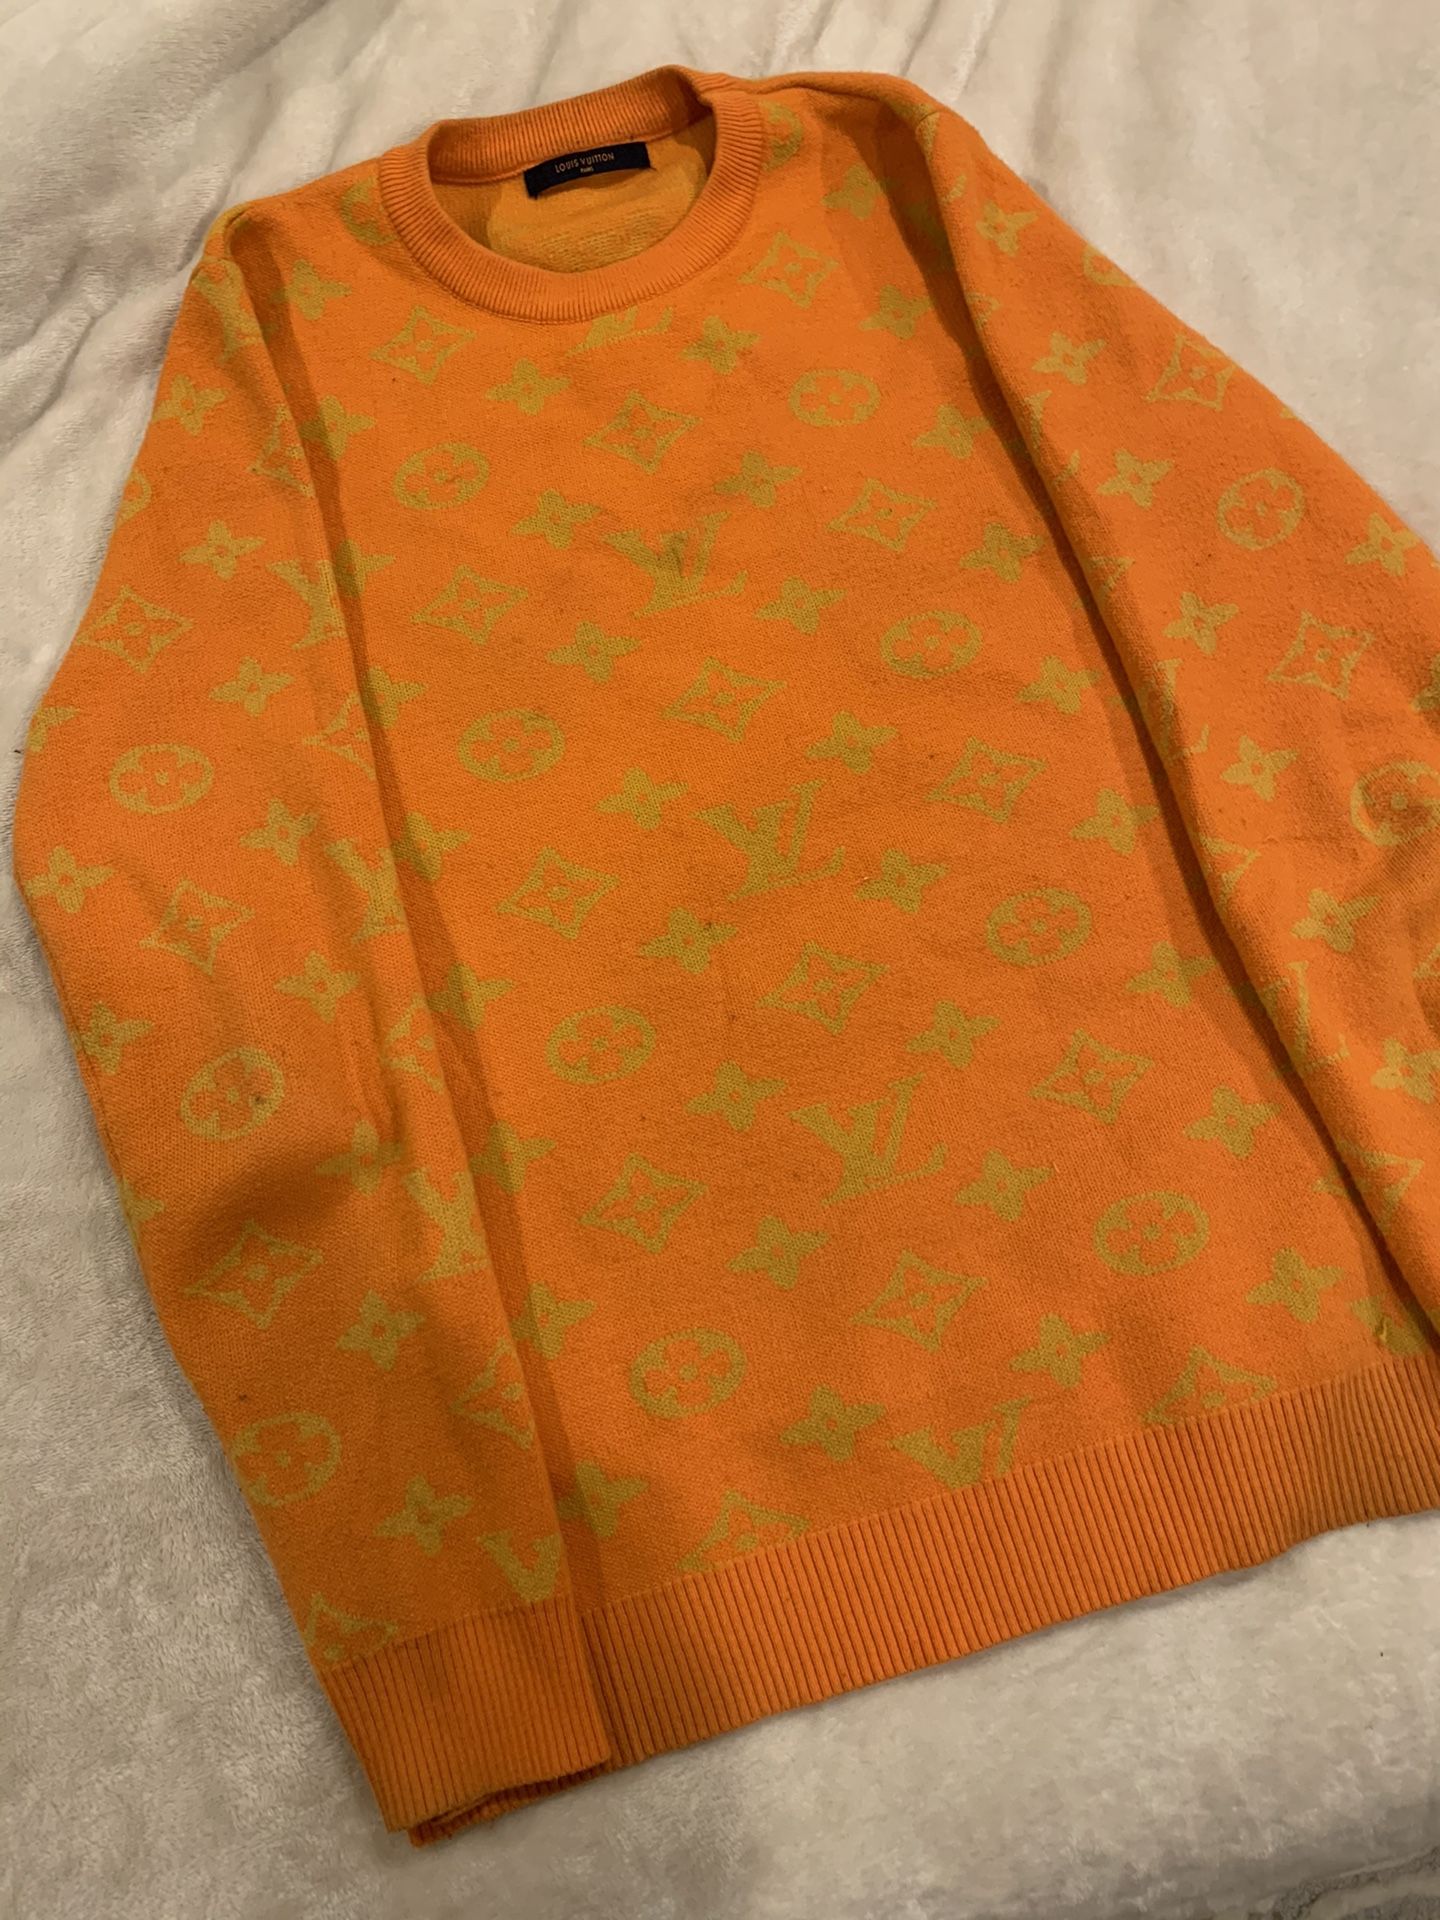 Authentic Louis Vuitton Sweater / $400 OBO